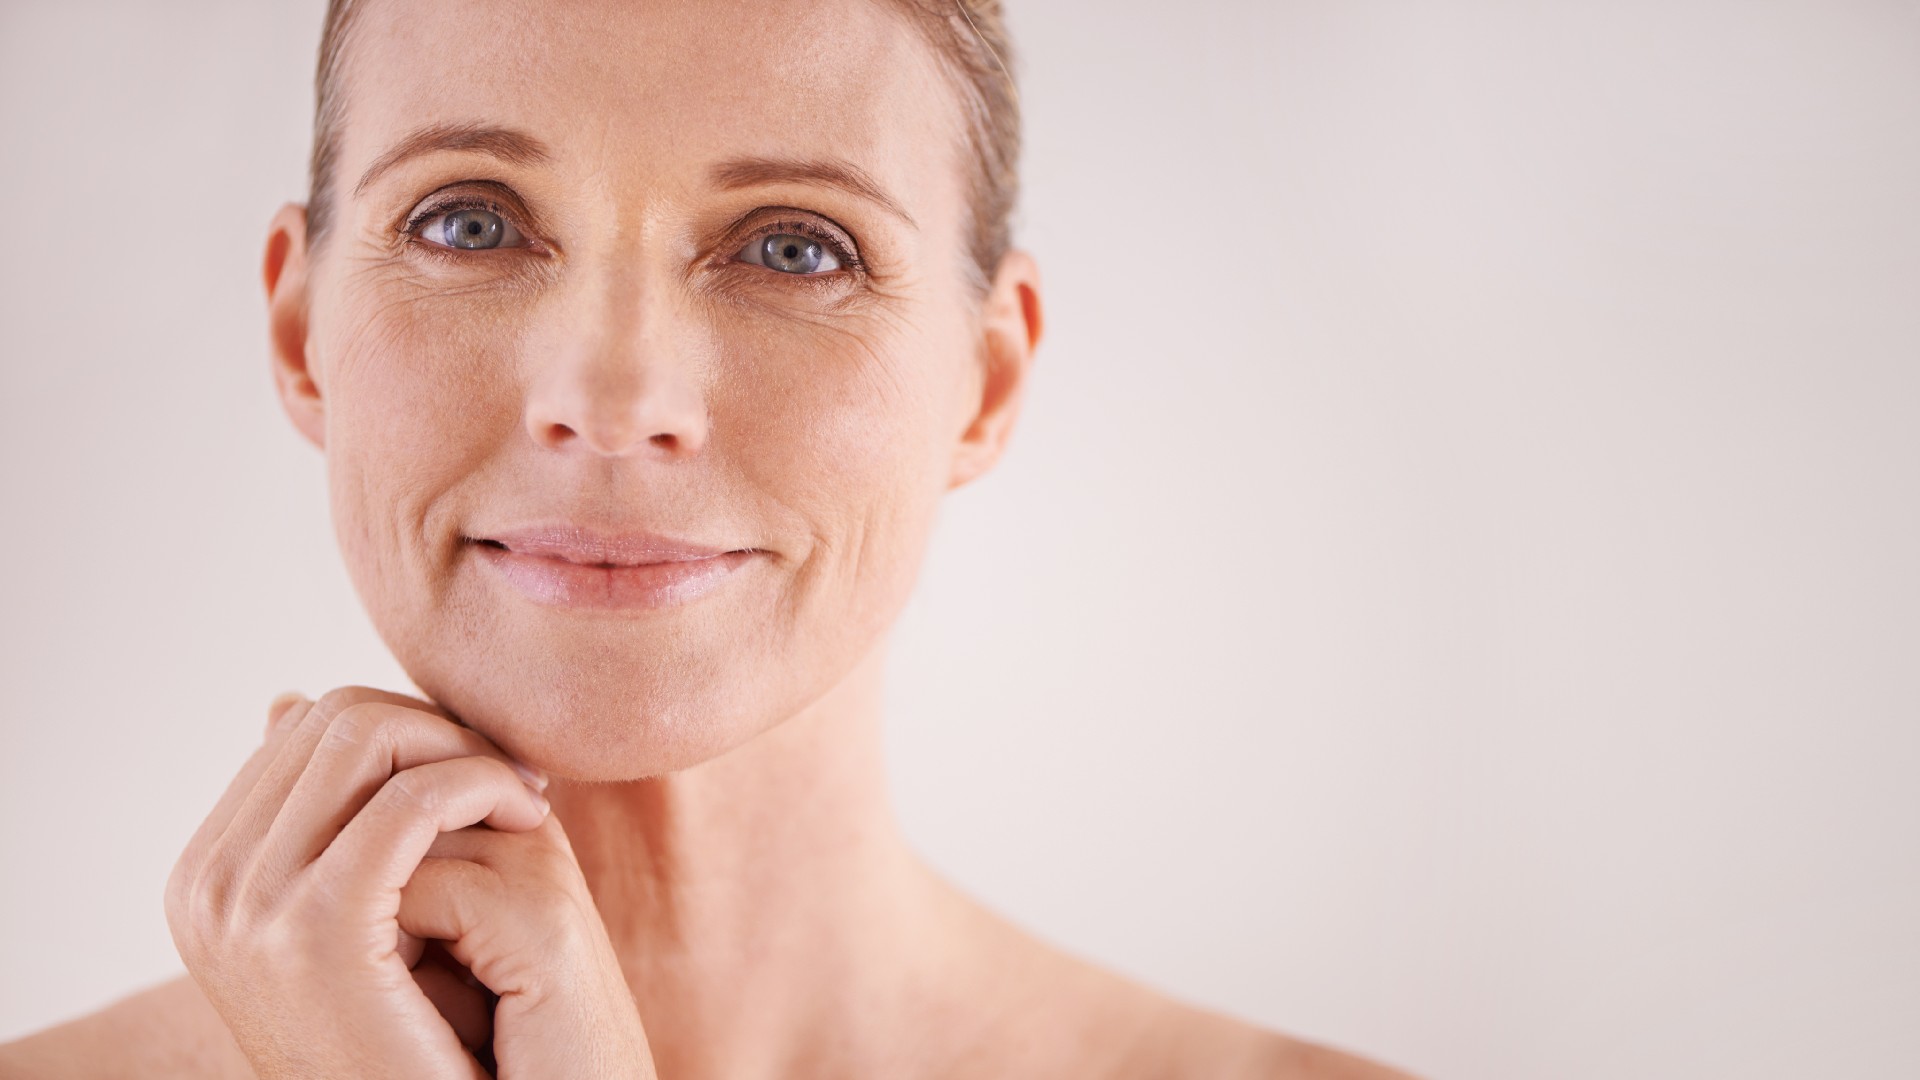 How to avoid wrinkles - No wrinkles at 40! 3 simple things I do to